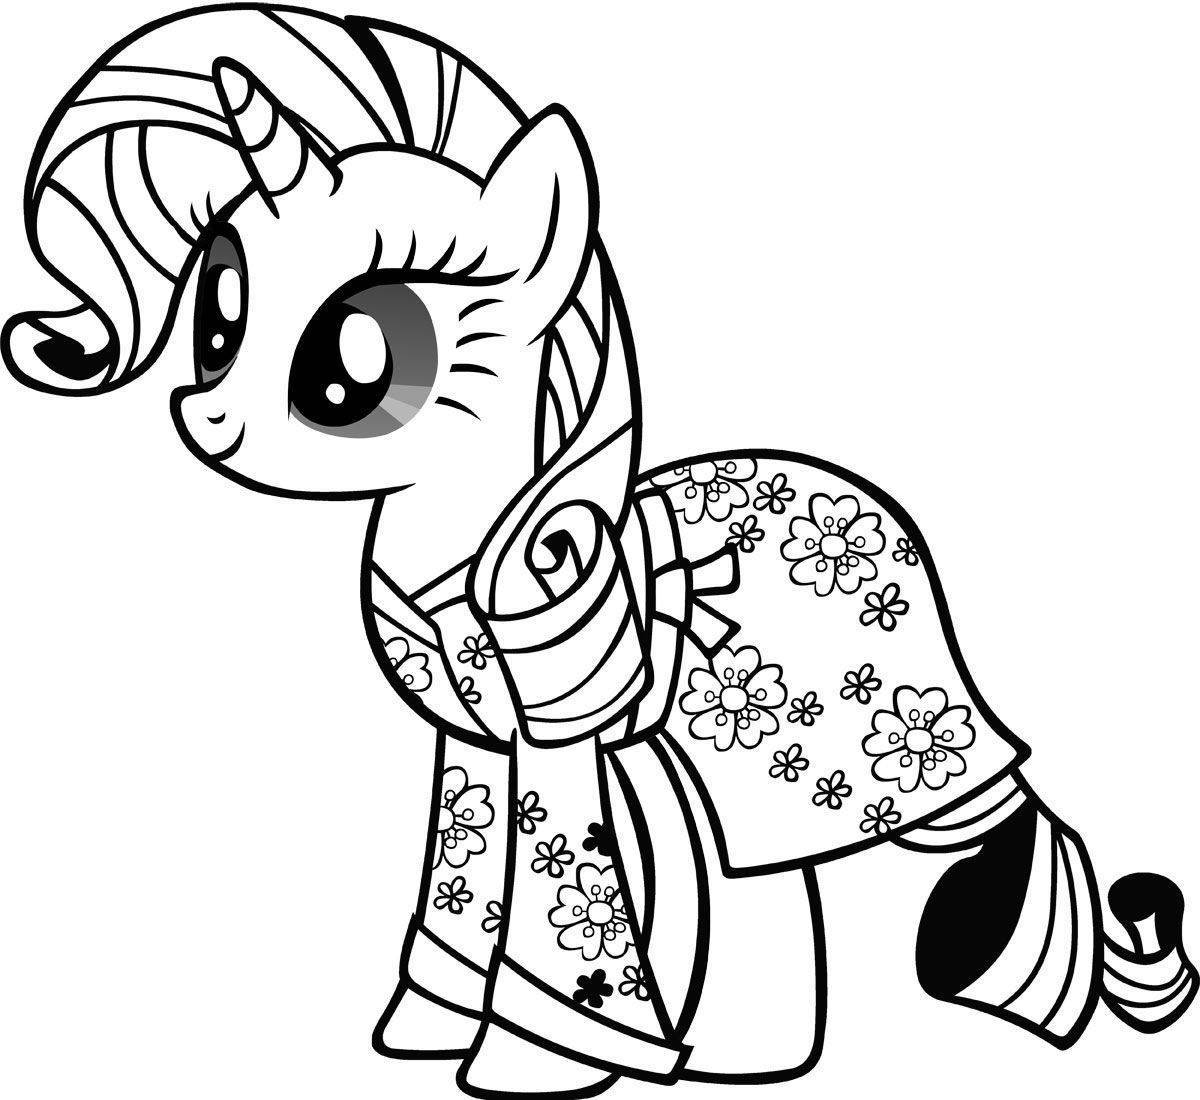 Coloring pages with taste for girls, small